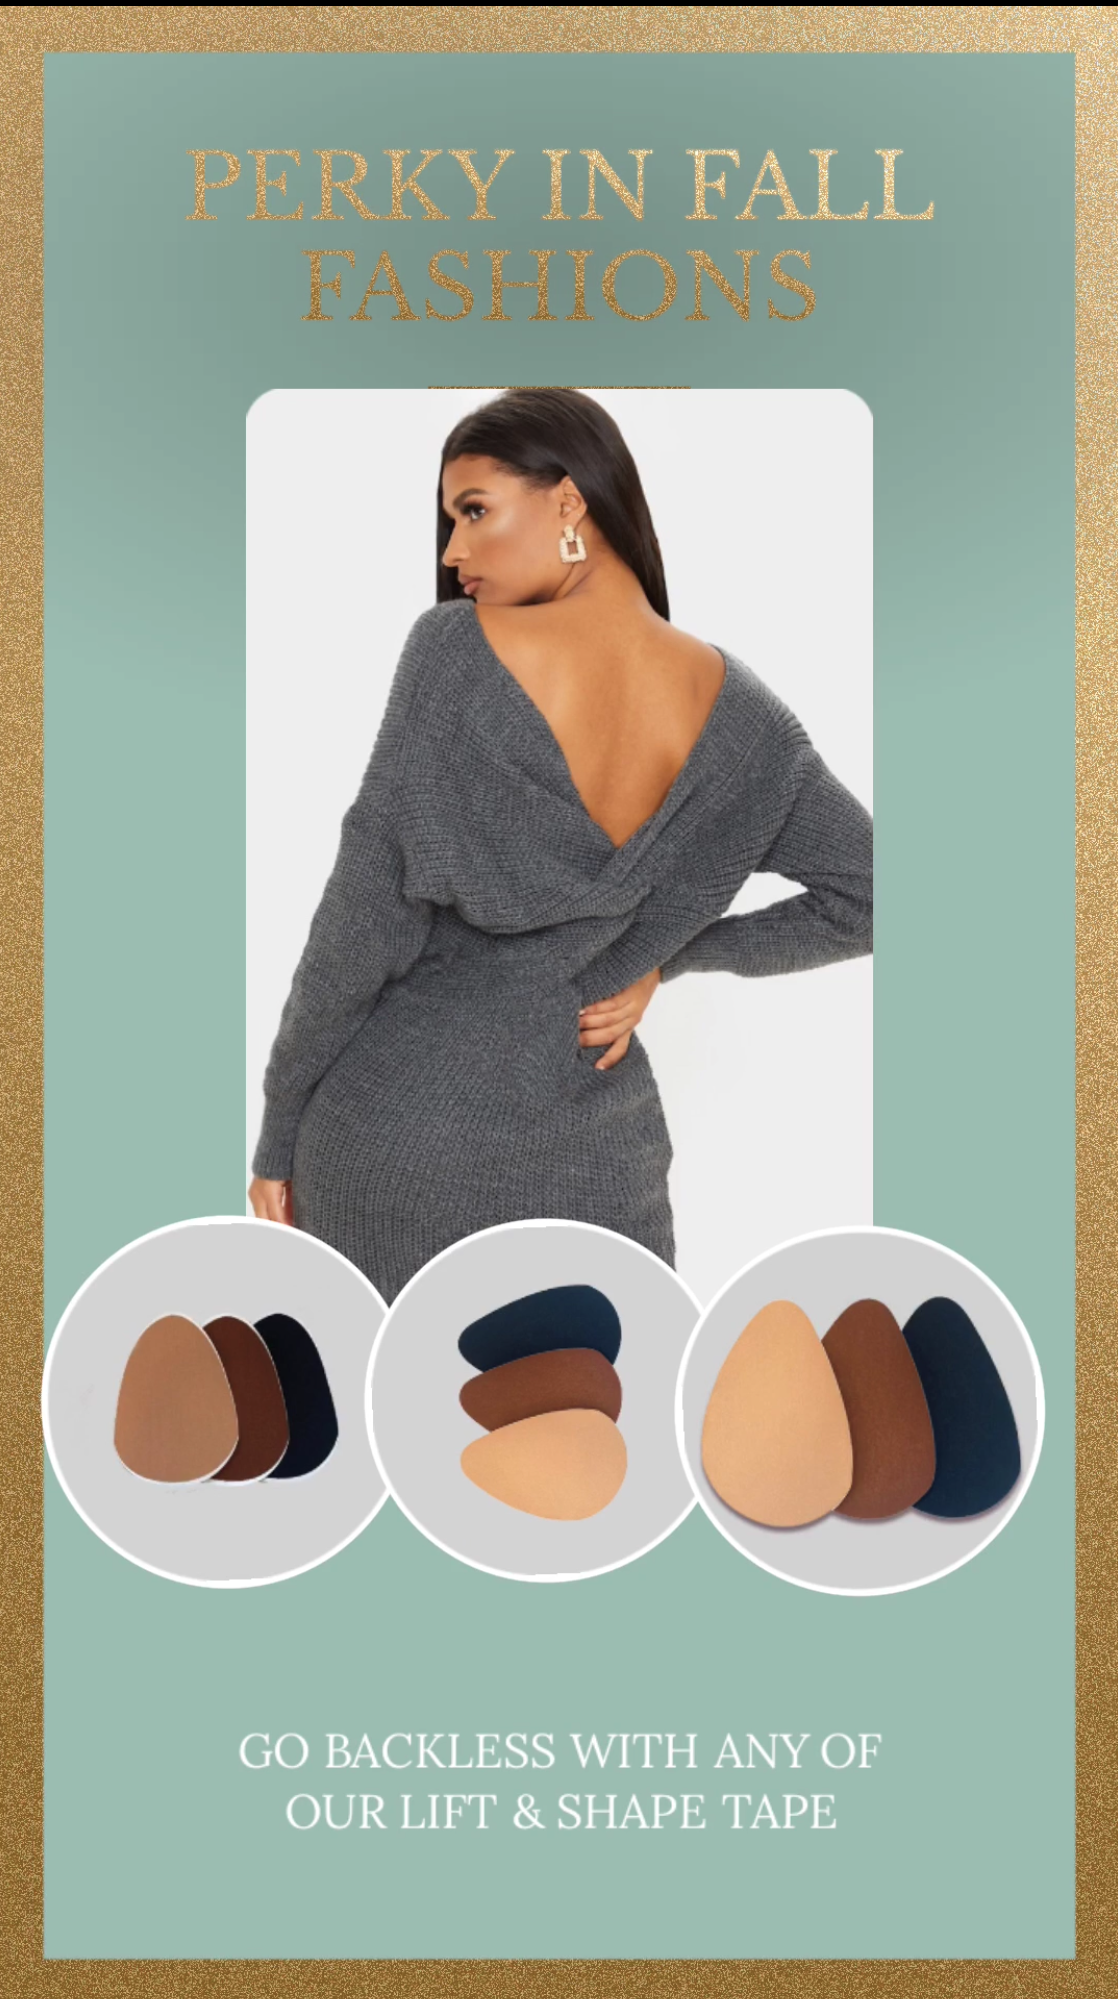 Use Perky Pear Breast Lift Tape to get that Comfy No Bra Feeling under Cozy Fall Knitted Styles